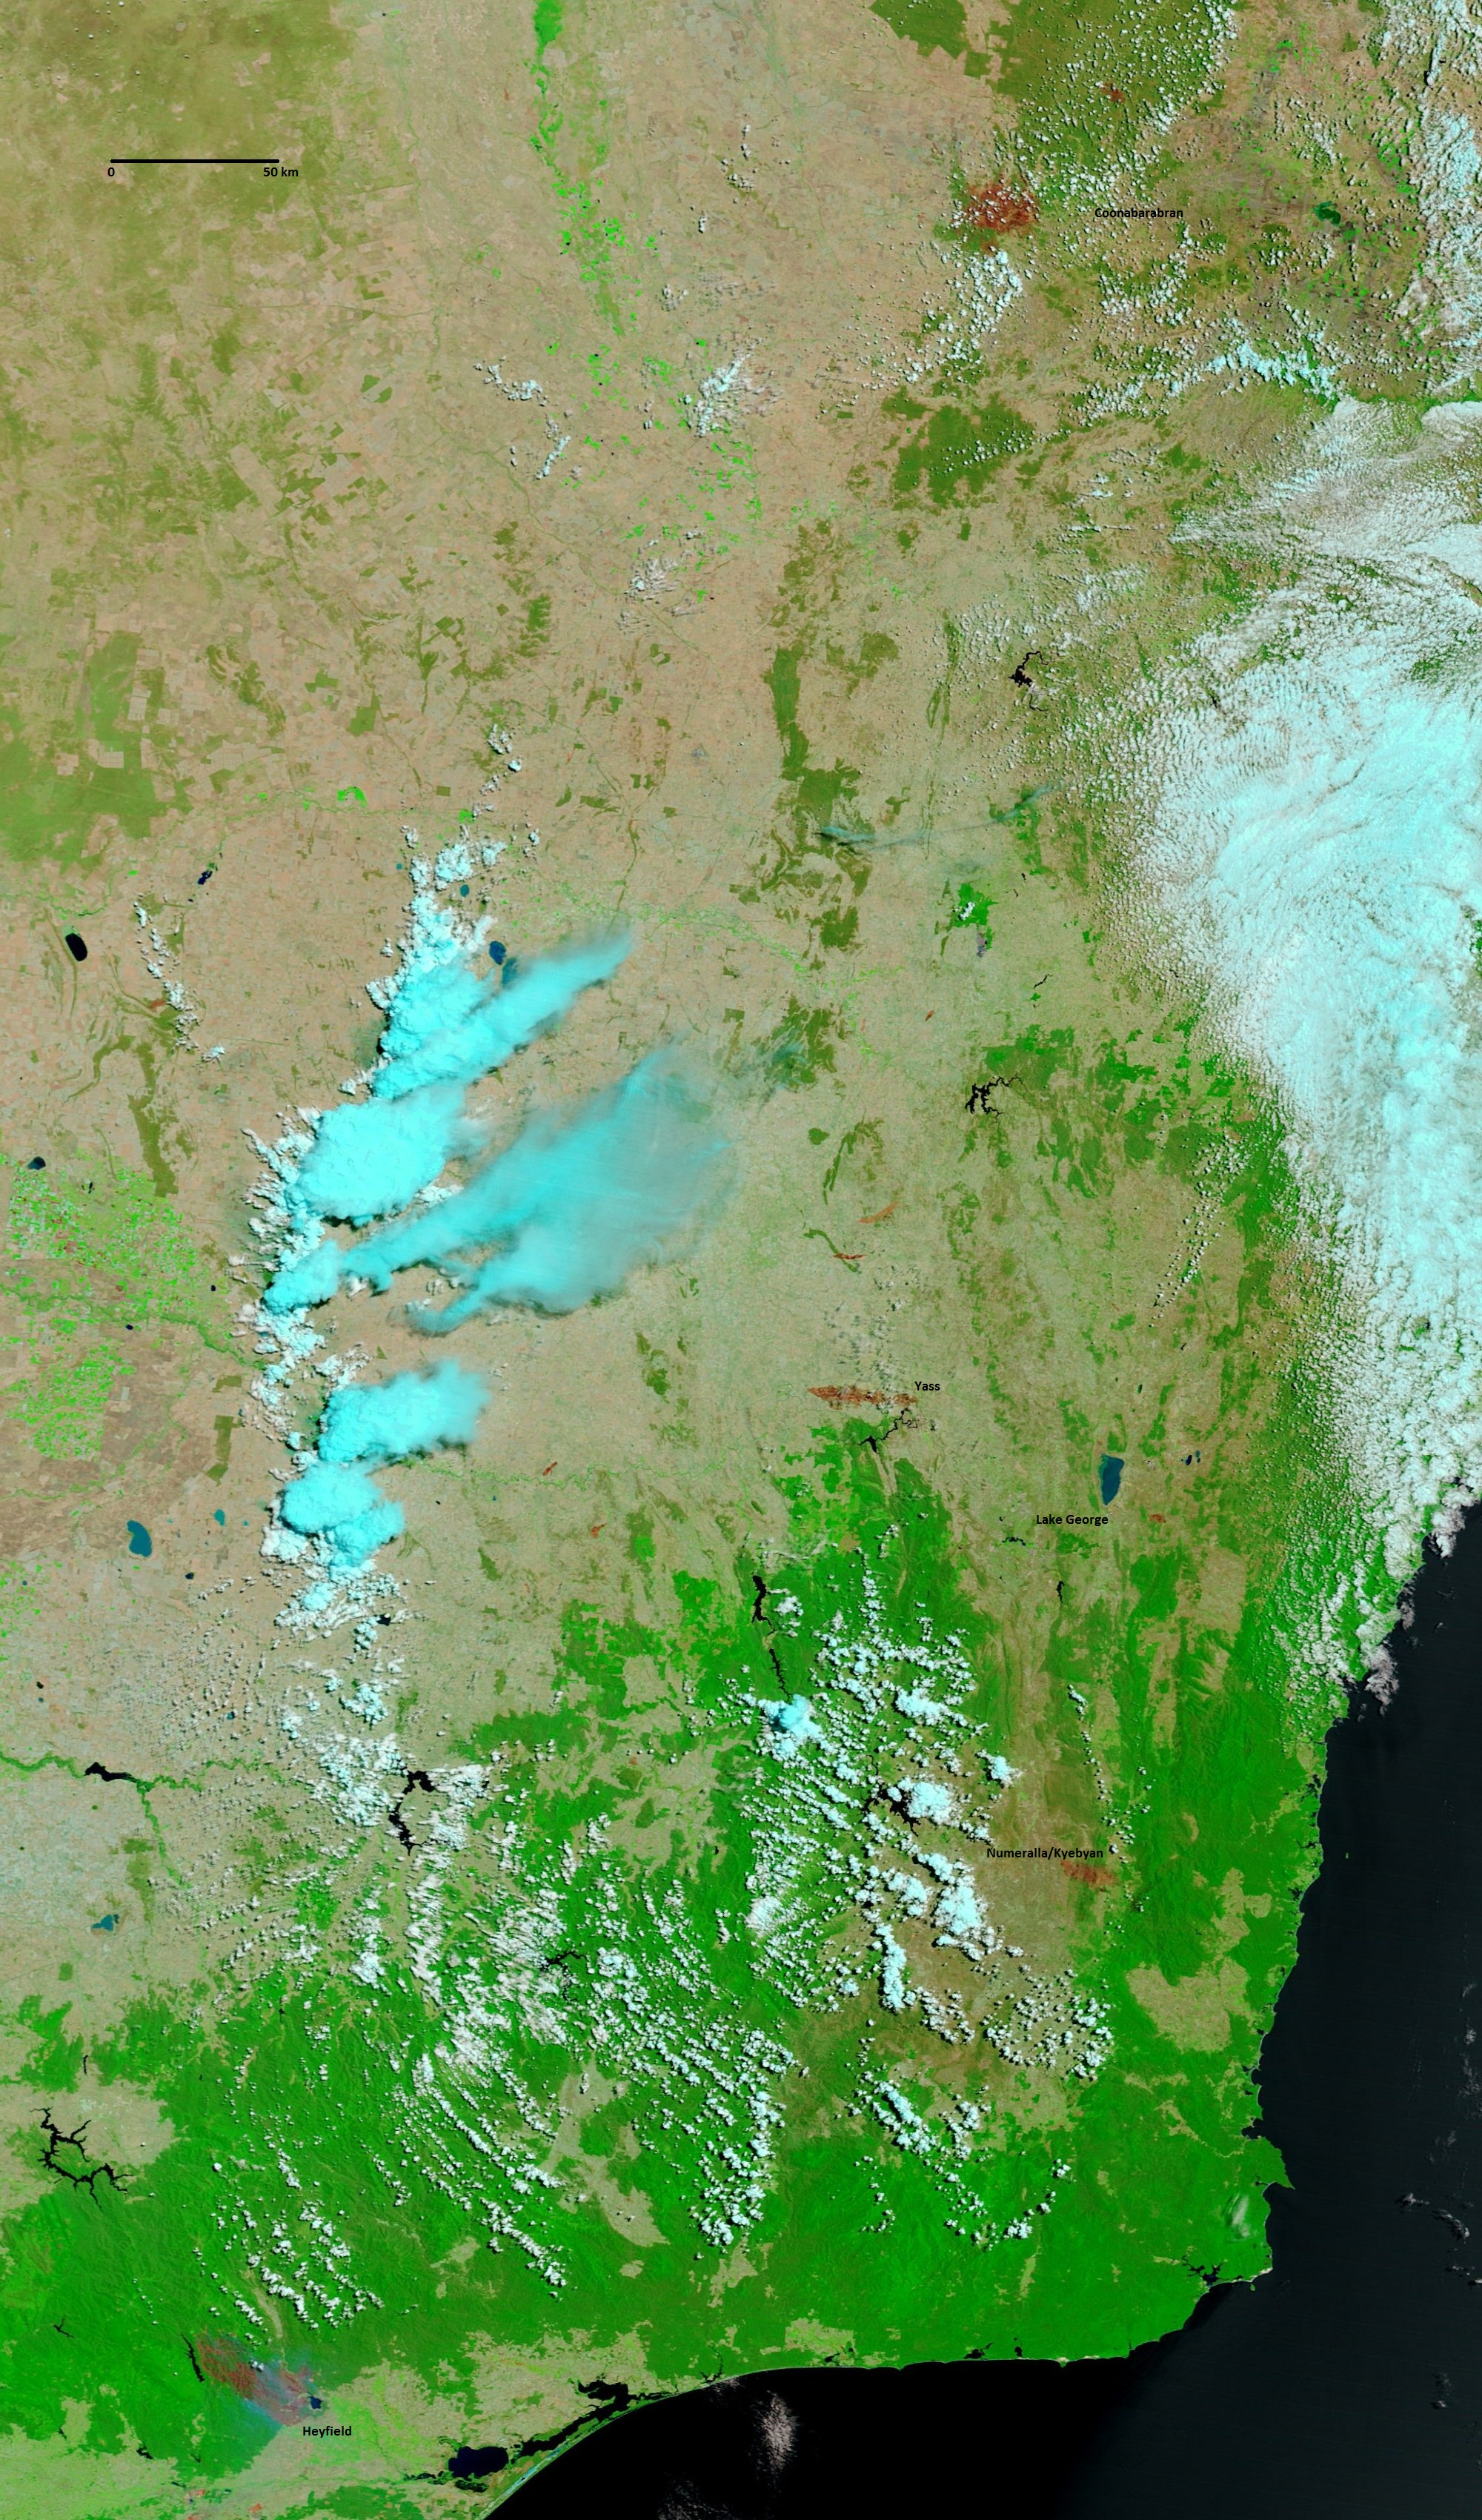 Satellite image looking down over parts of NSW and Victoria showing smoke plumes